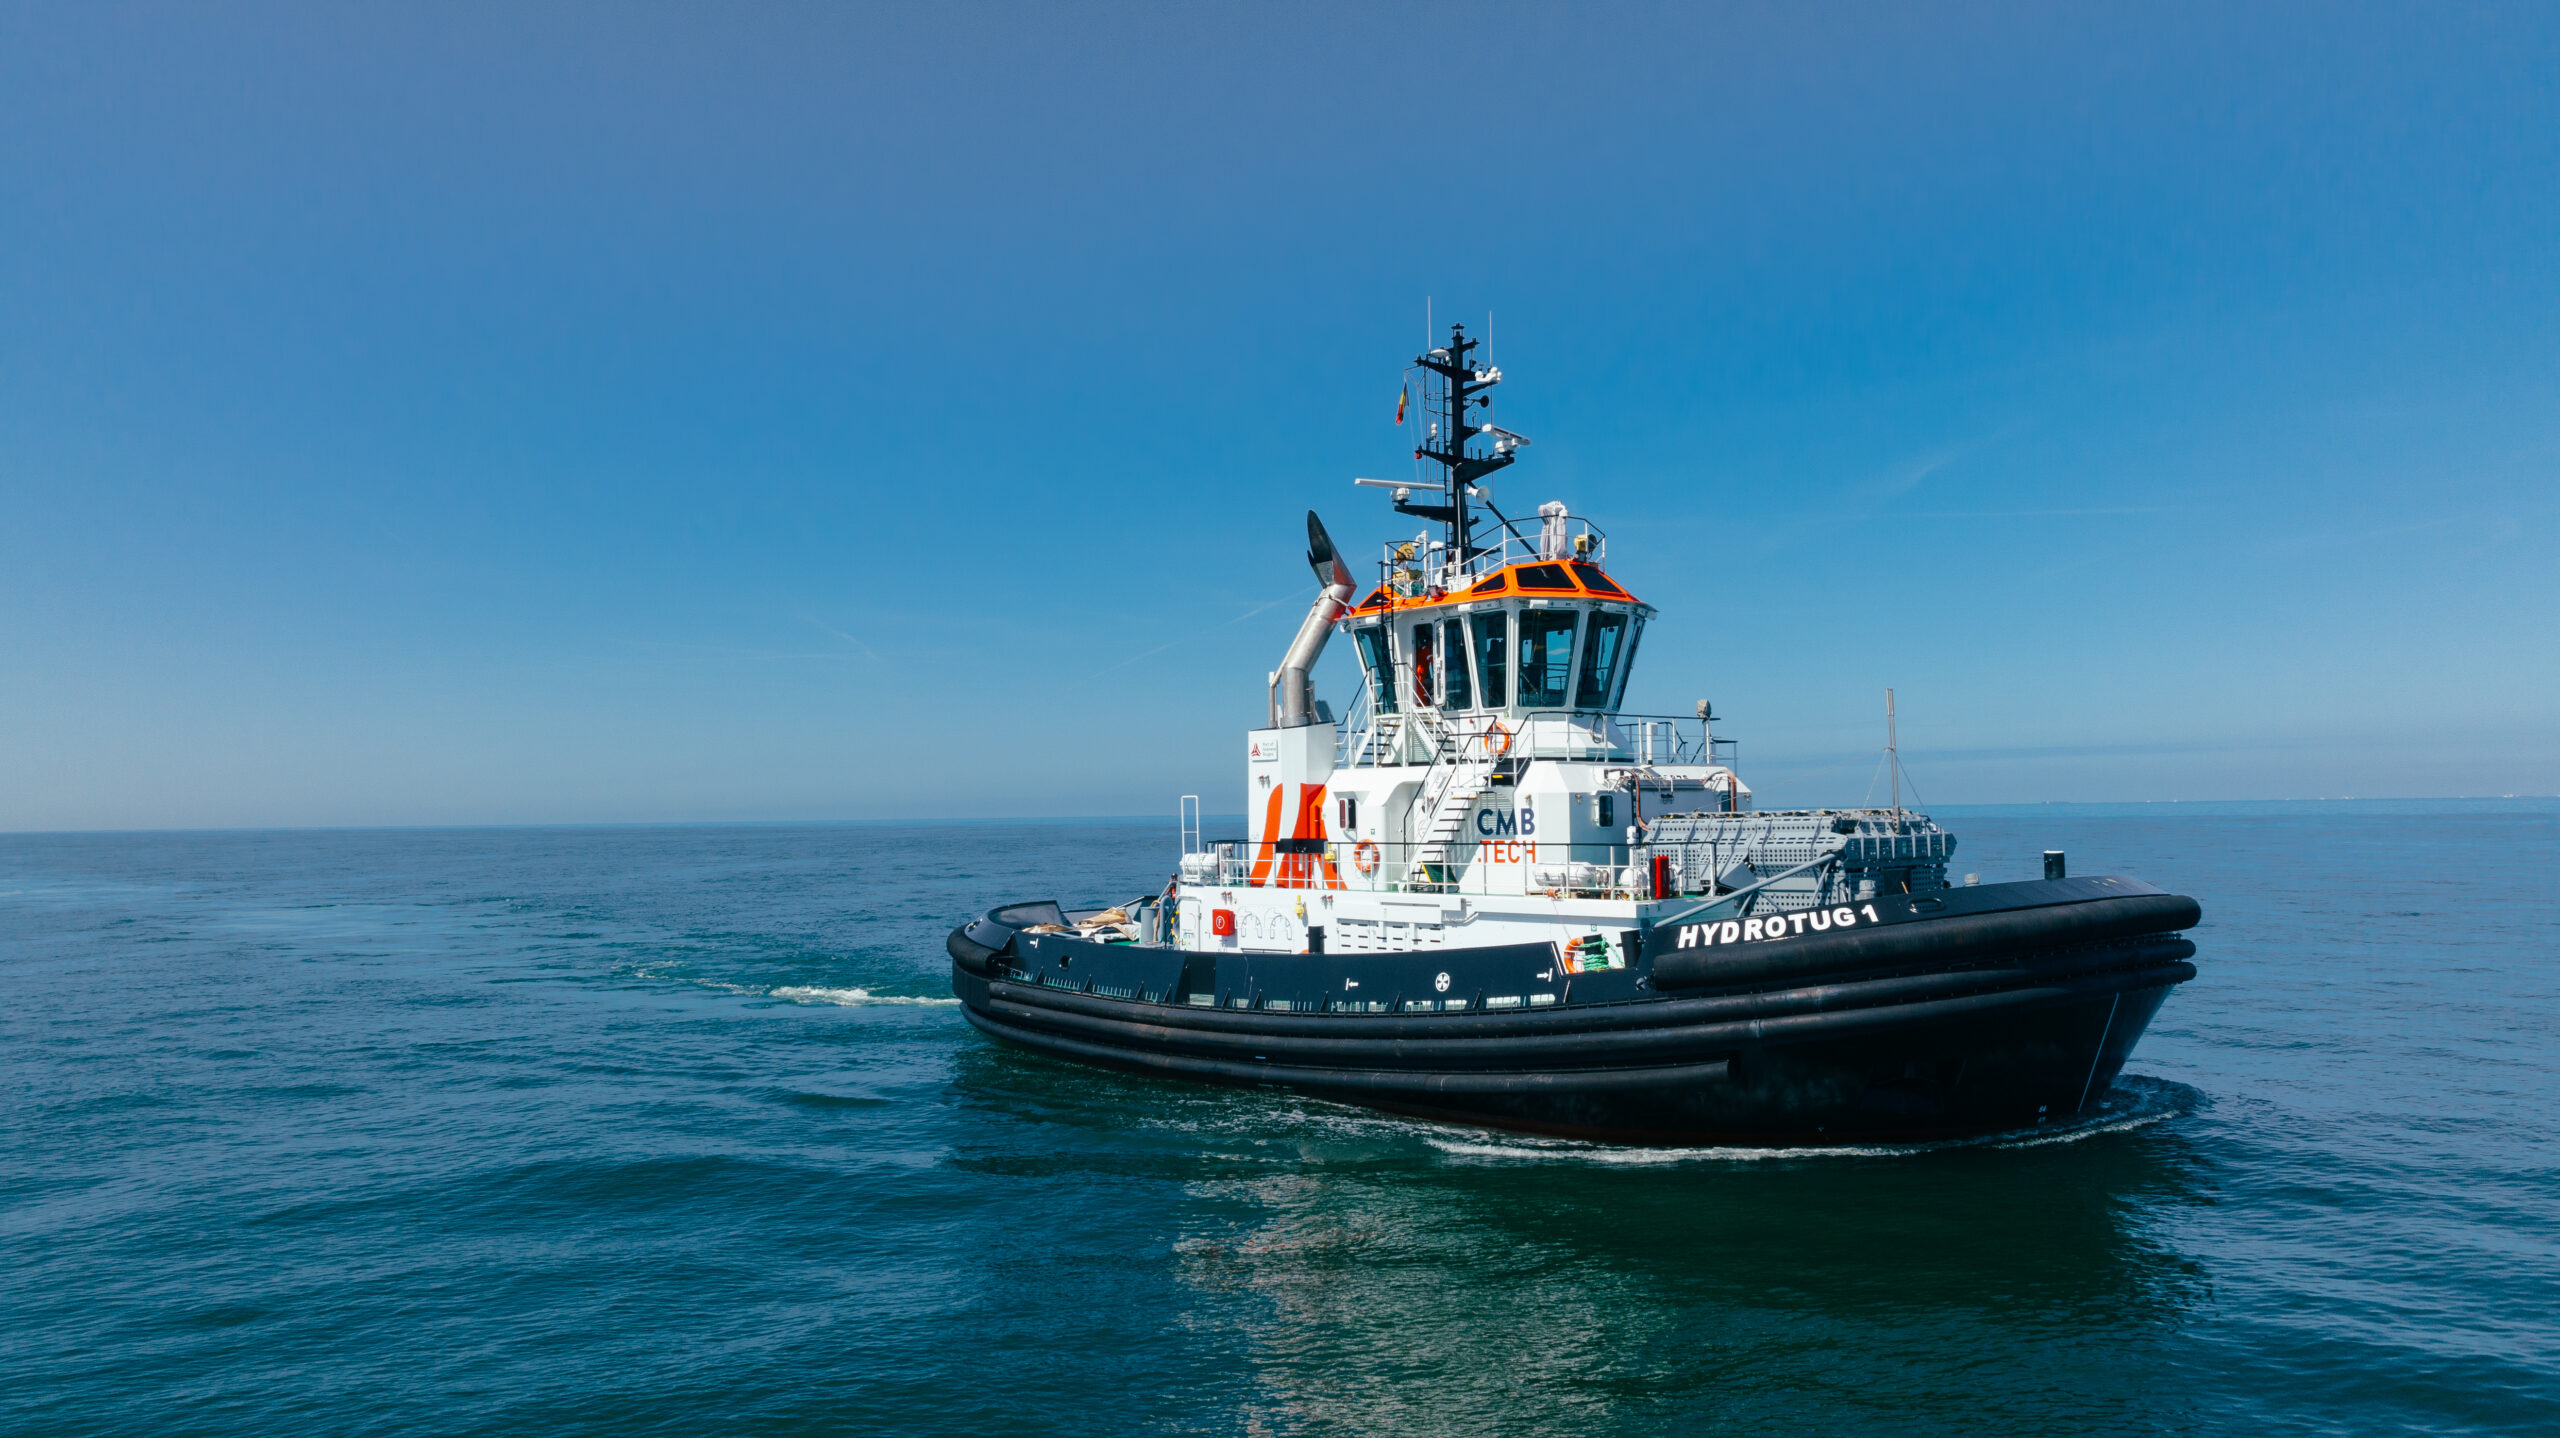 Hydrotug 1 during the sea trial